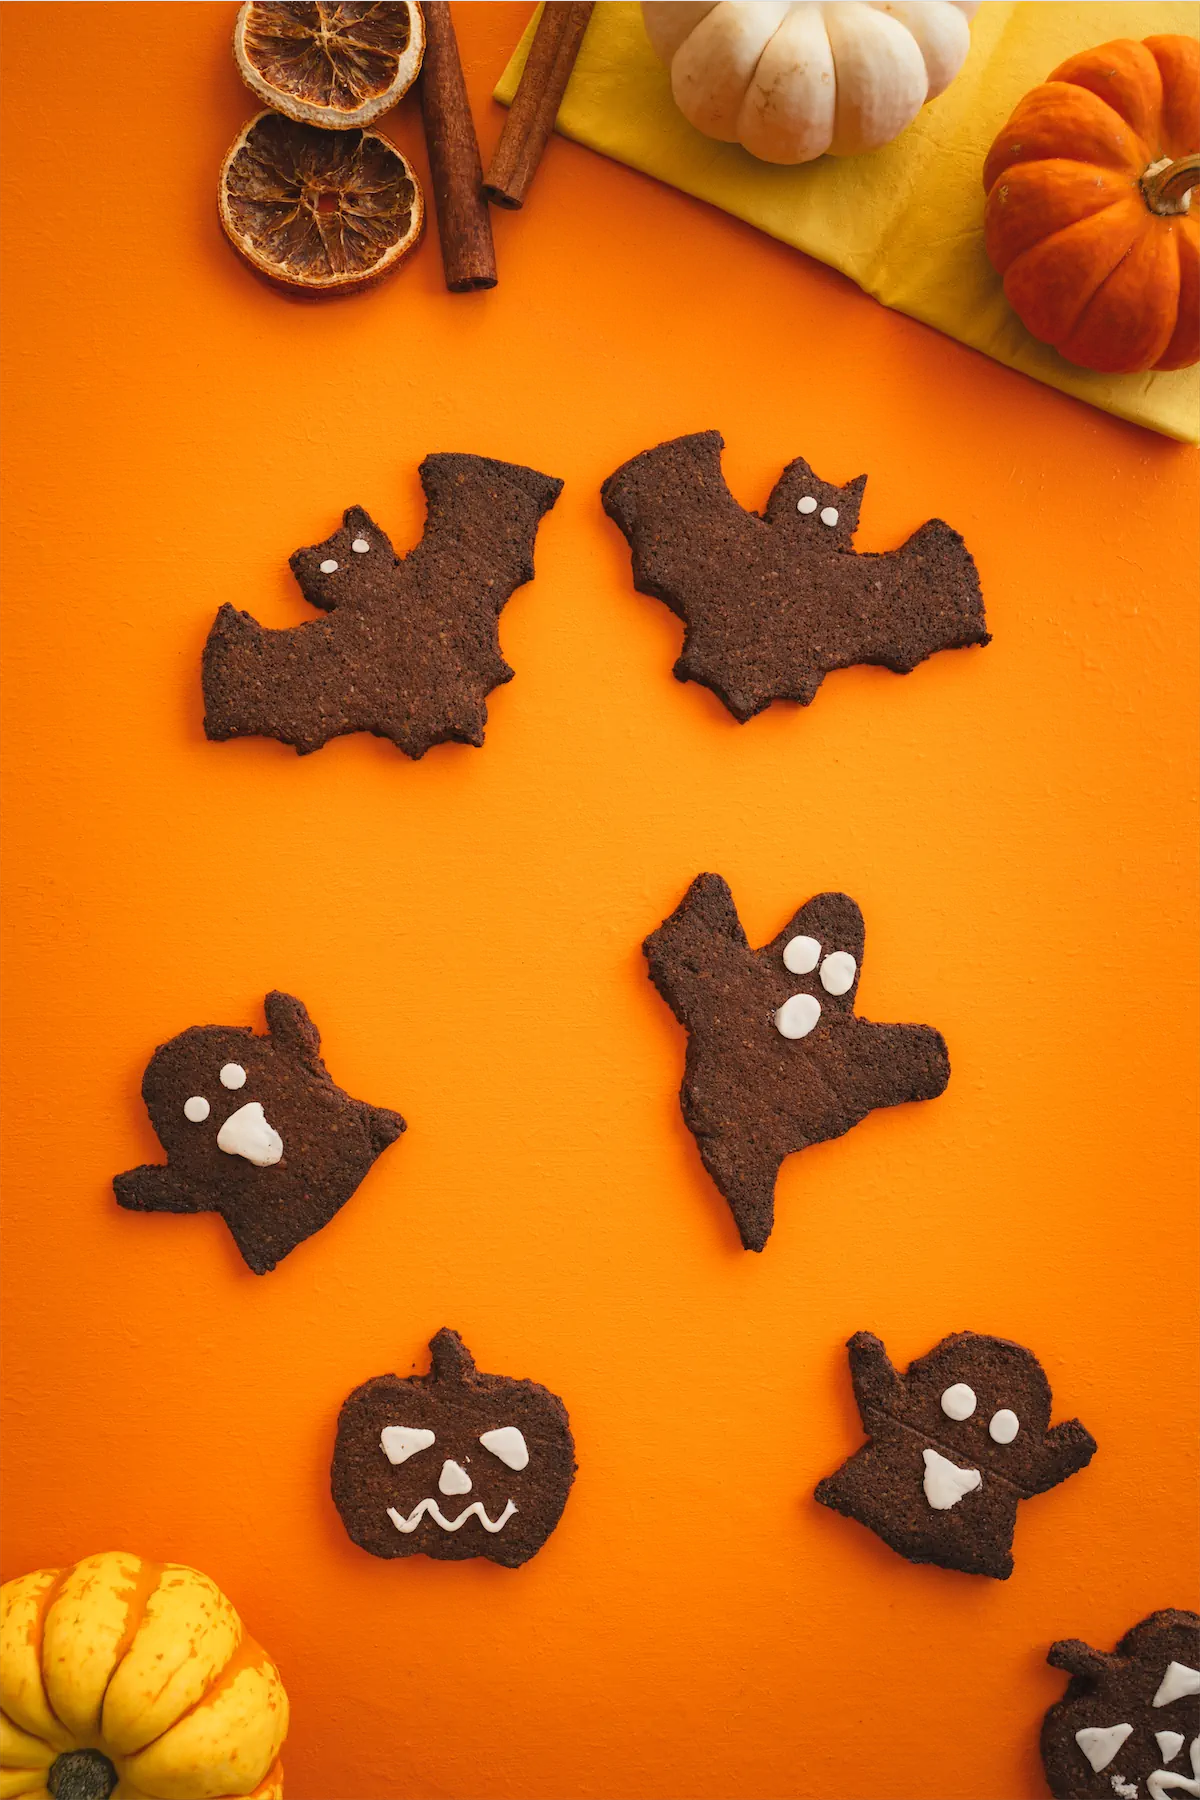 Bat, ghost, and pumpkin-shaped keto Halloween cookies are arranged on an orange table alongside red and yellow miniature pumpkins.